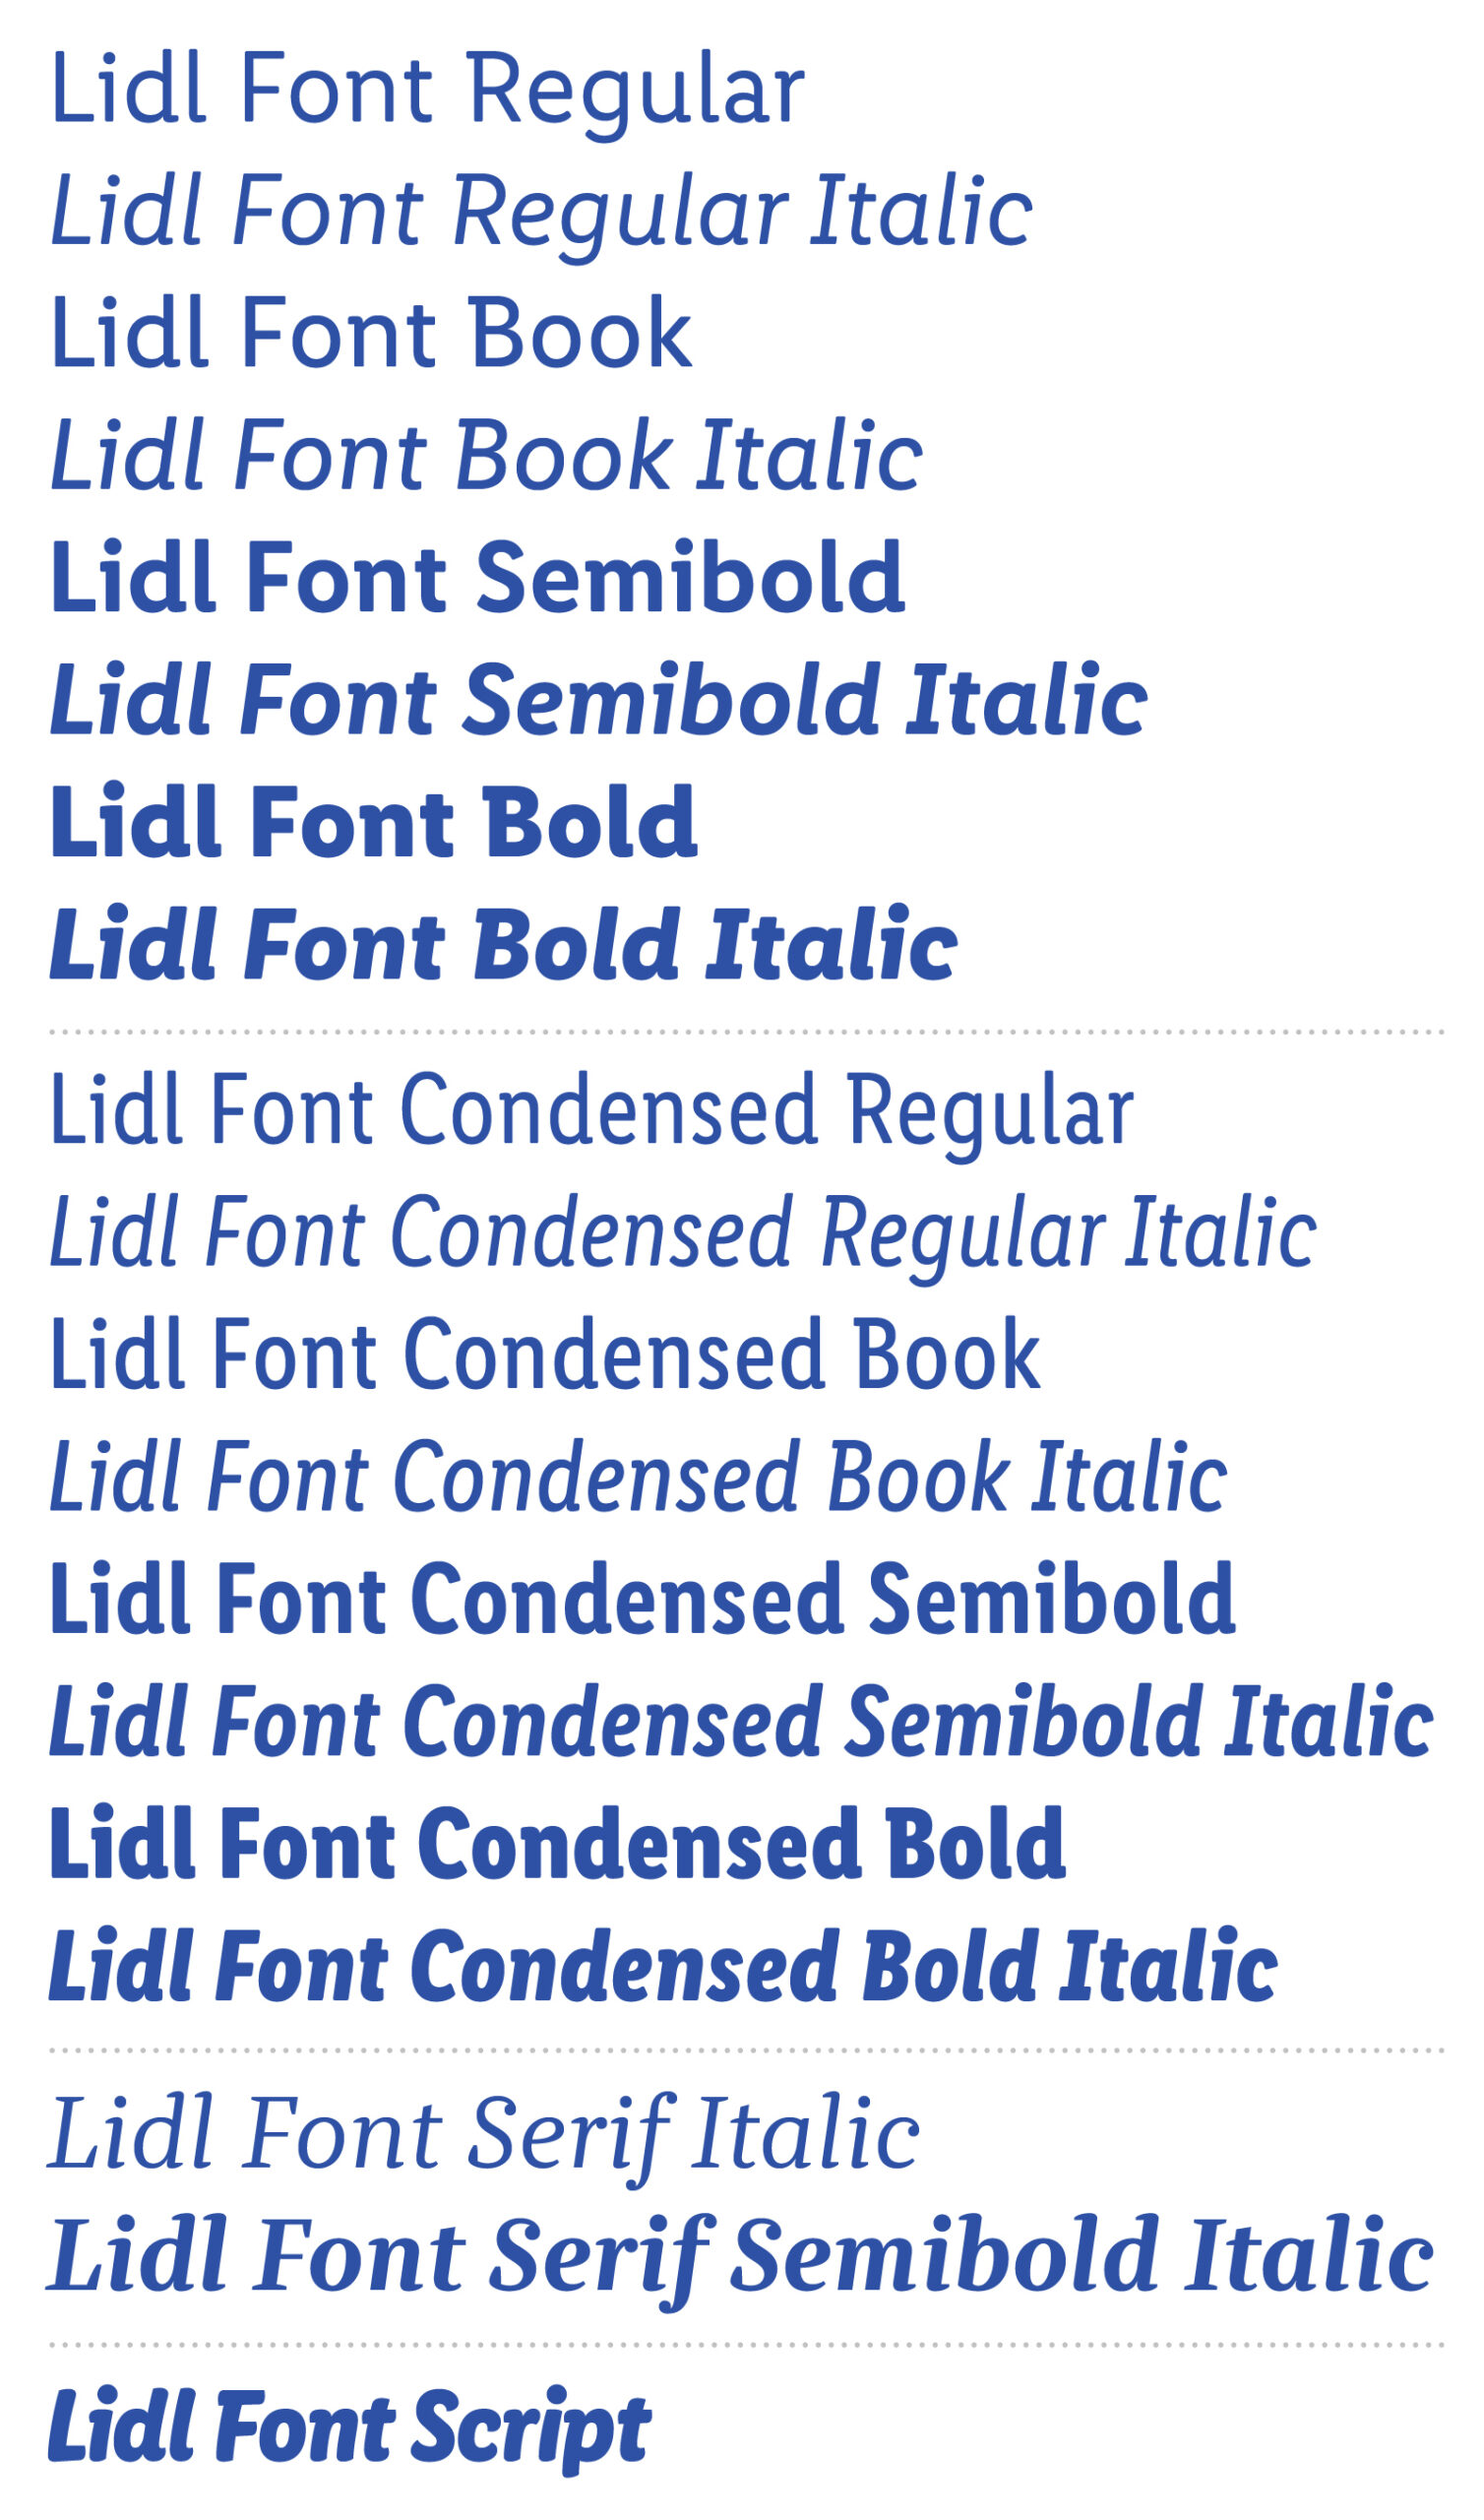 All Lidl Fonts in a row